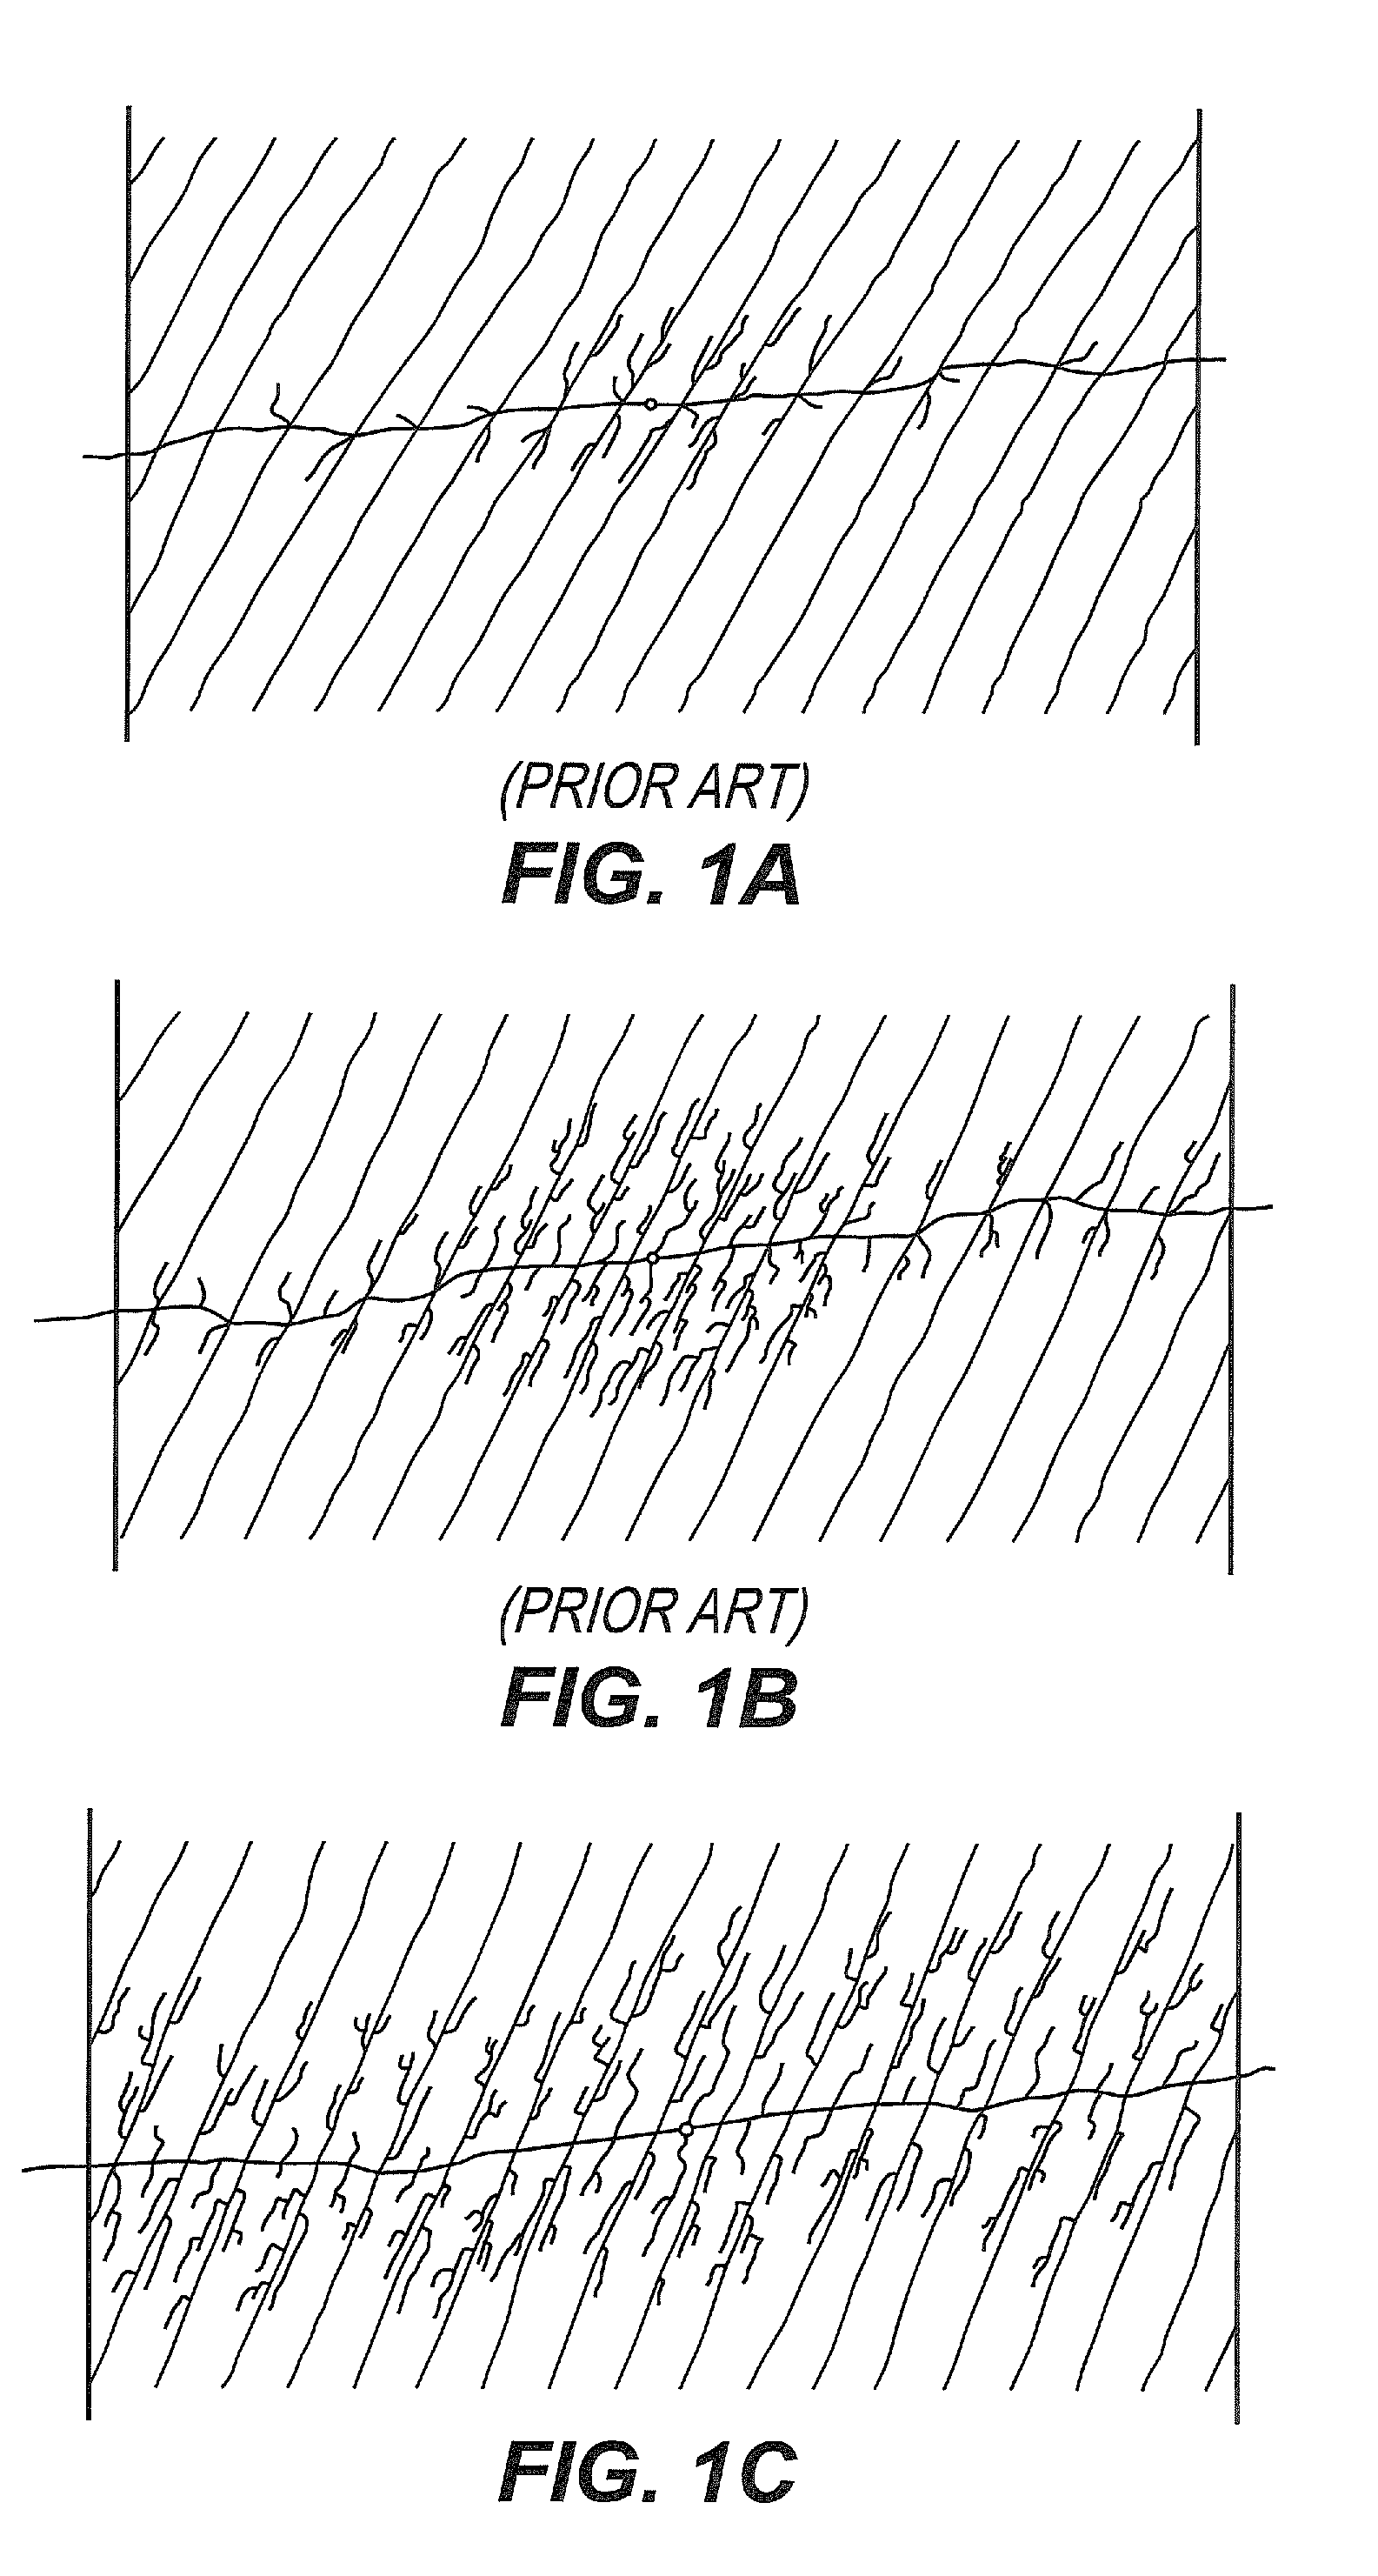 Method of Increasing the Permeability of a Subterranean Formation by Creating a Multiple Fracture Network